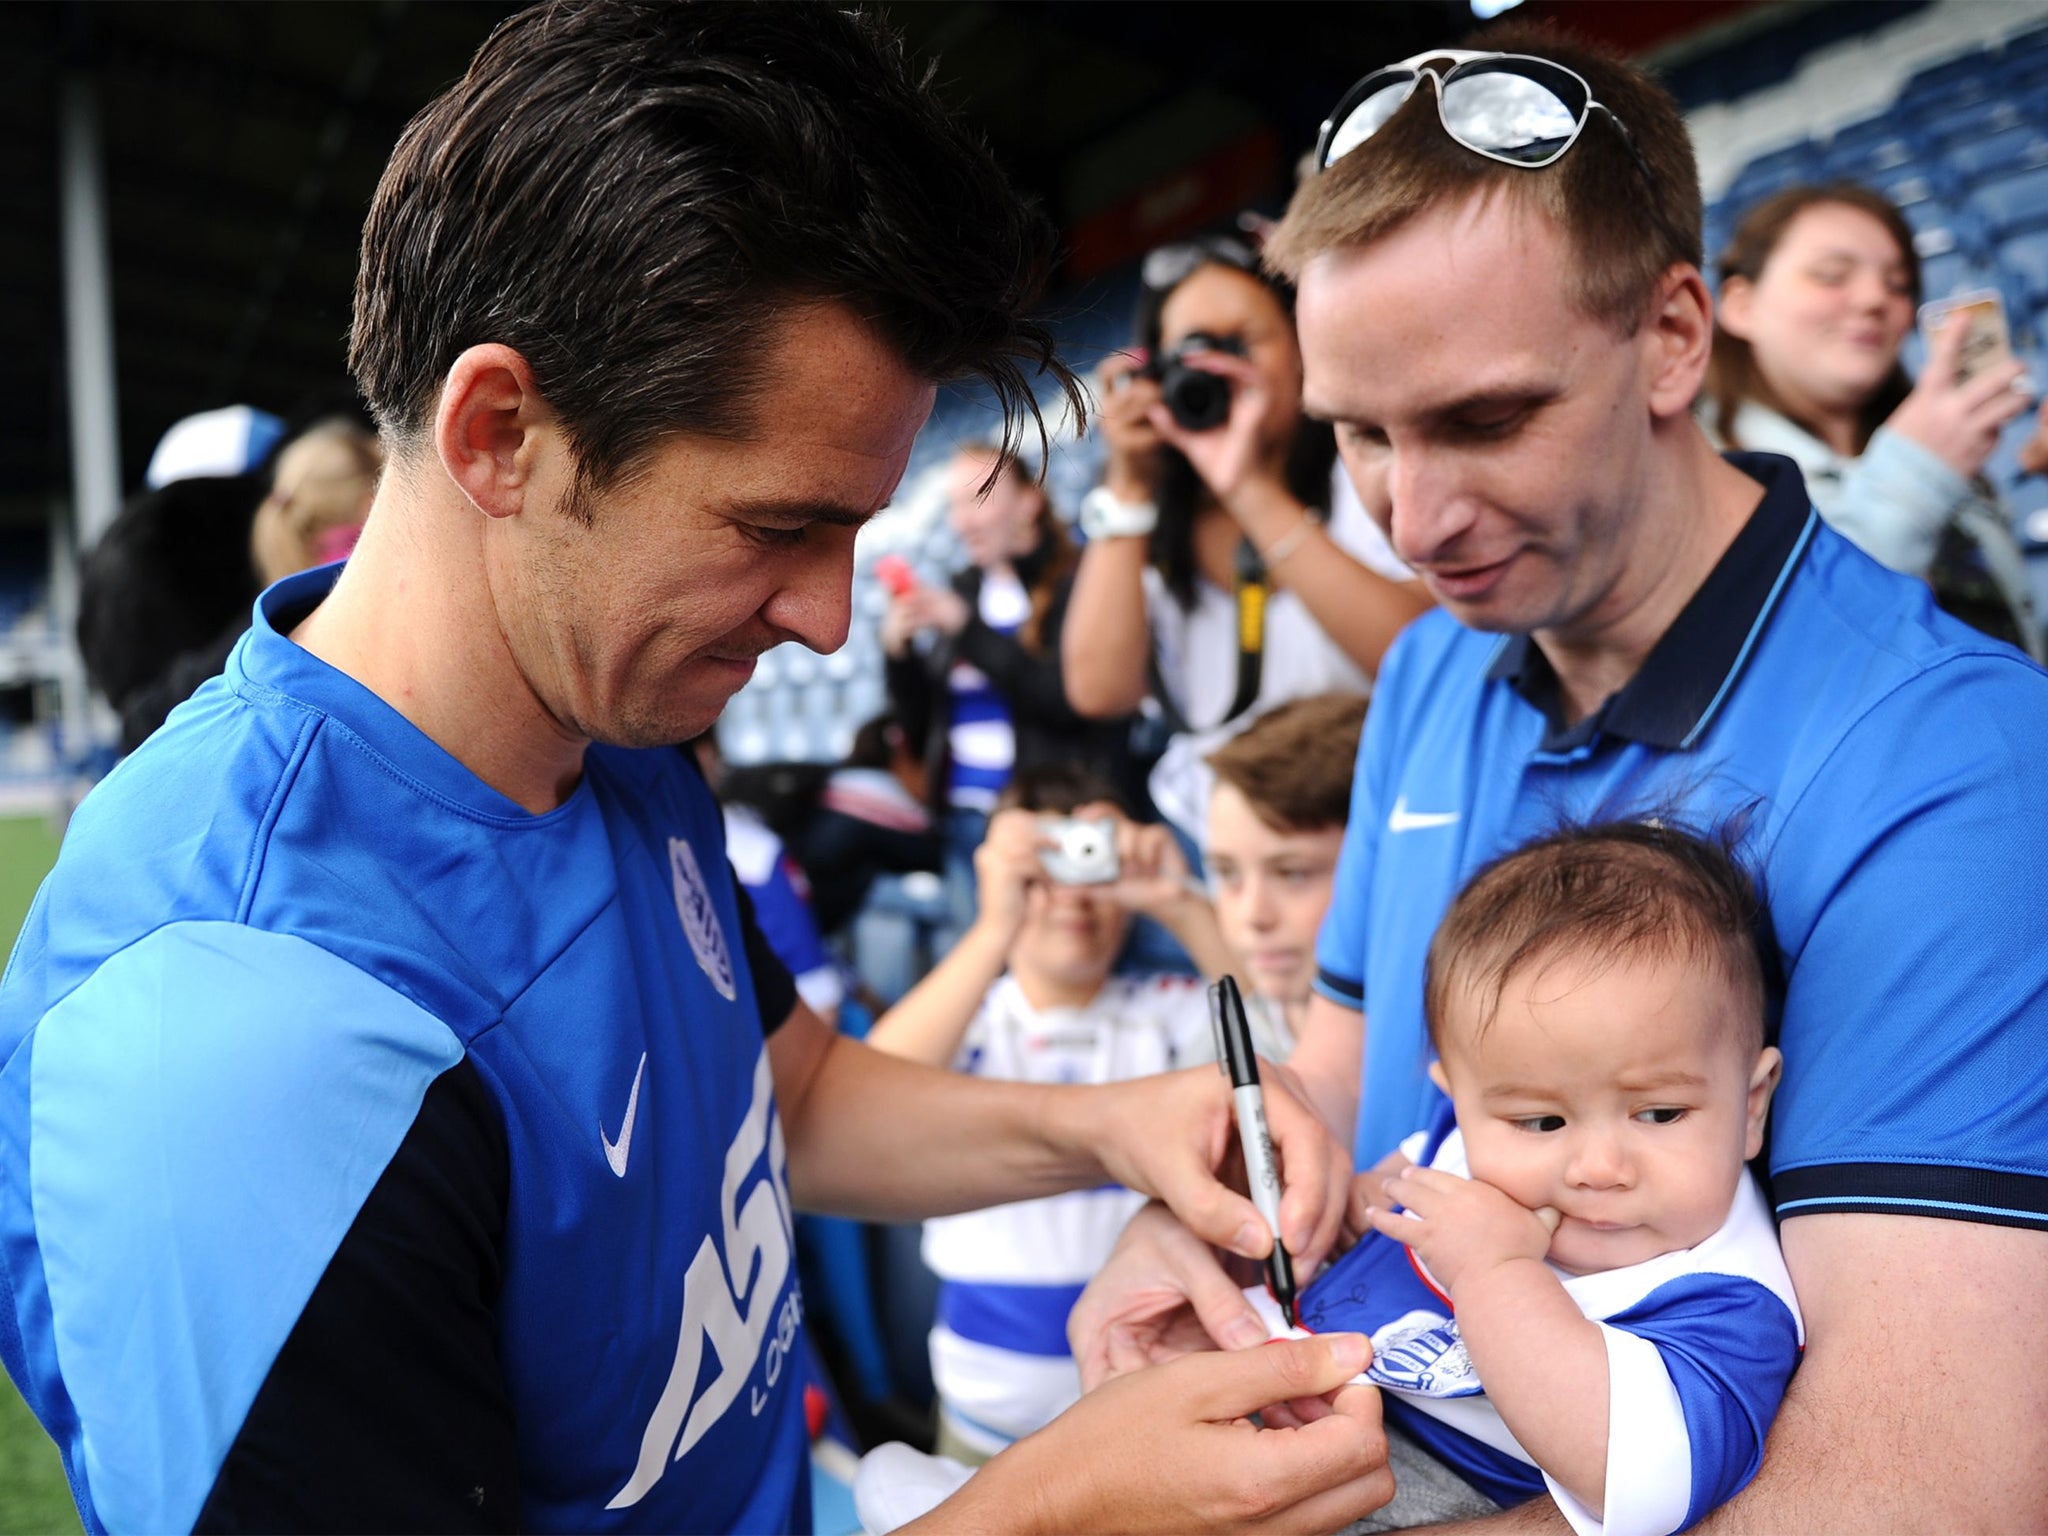 Joey Barton signs a baby’s shirt at QPR’s open day